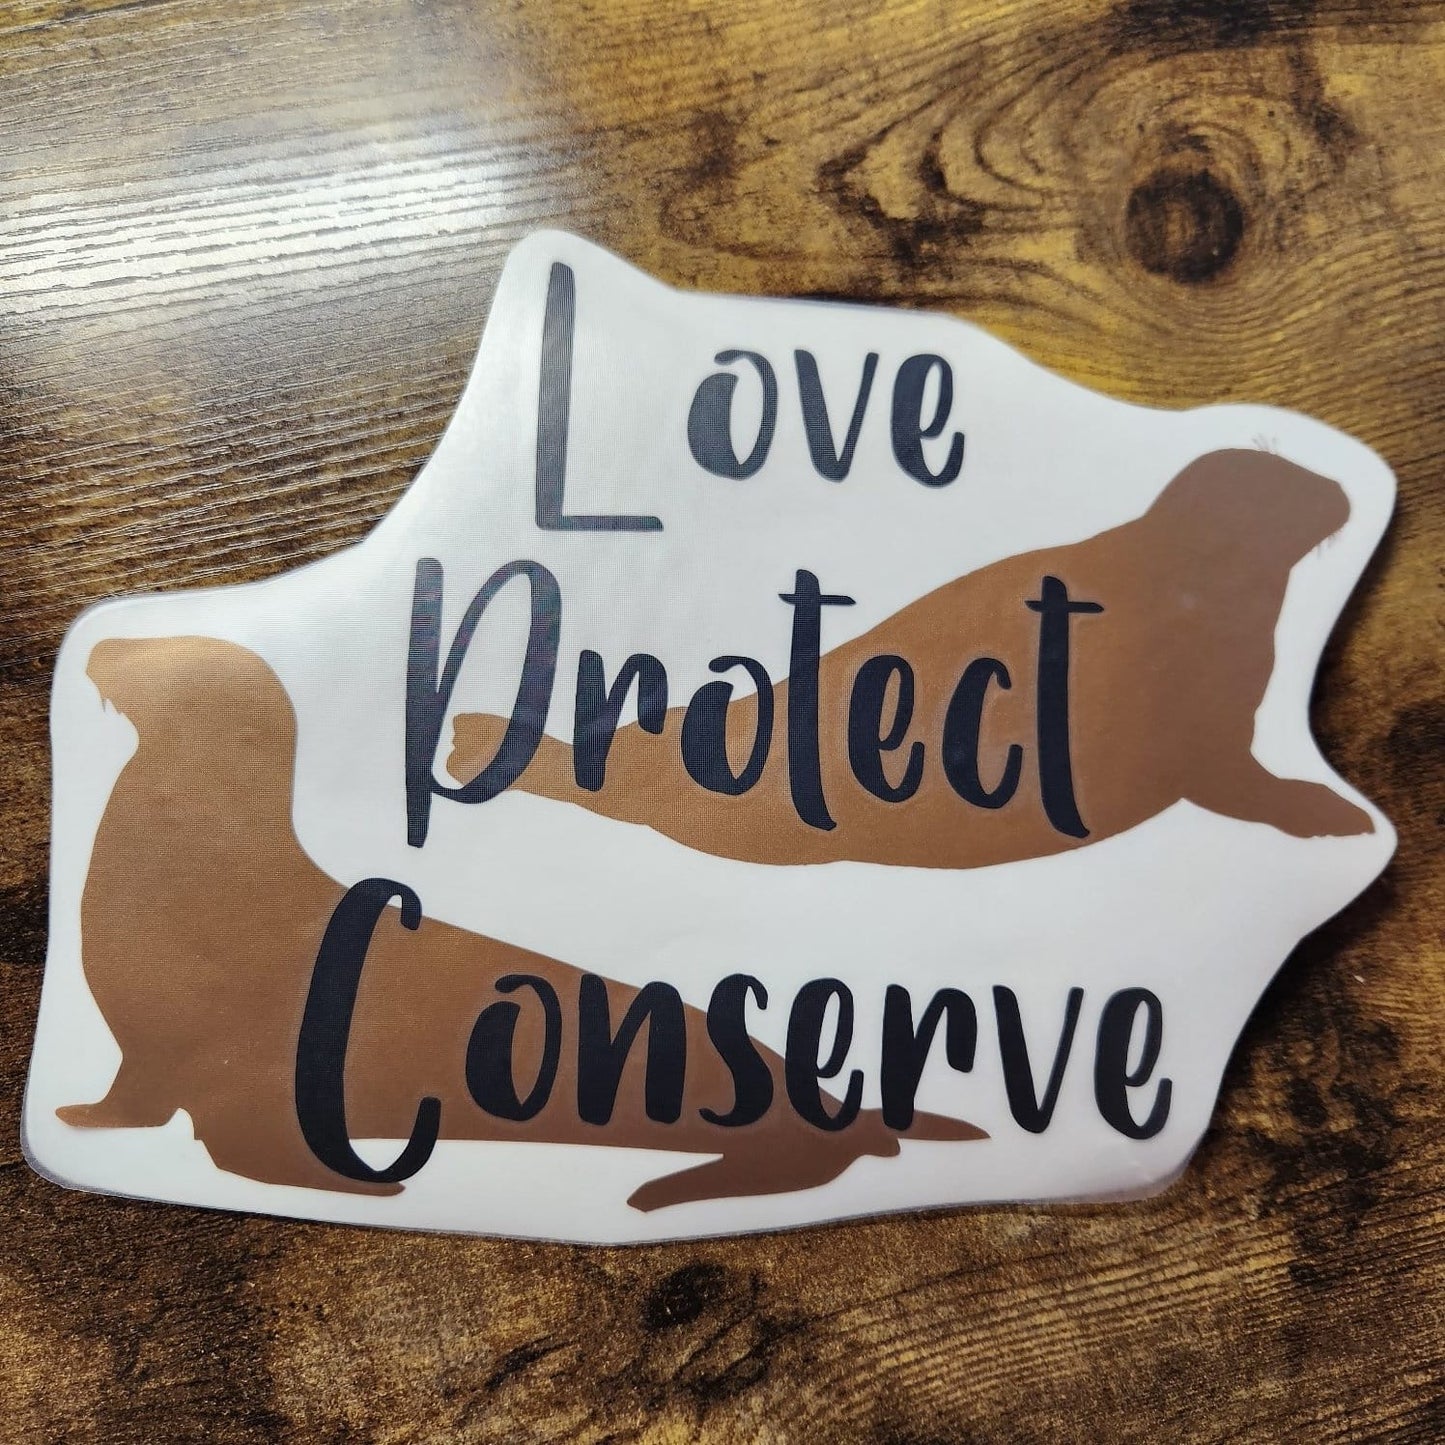 Seal and Sea Lion - Layered Love Protect Conserve - Vinyl Decal (Made to Order)